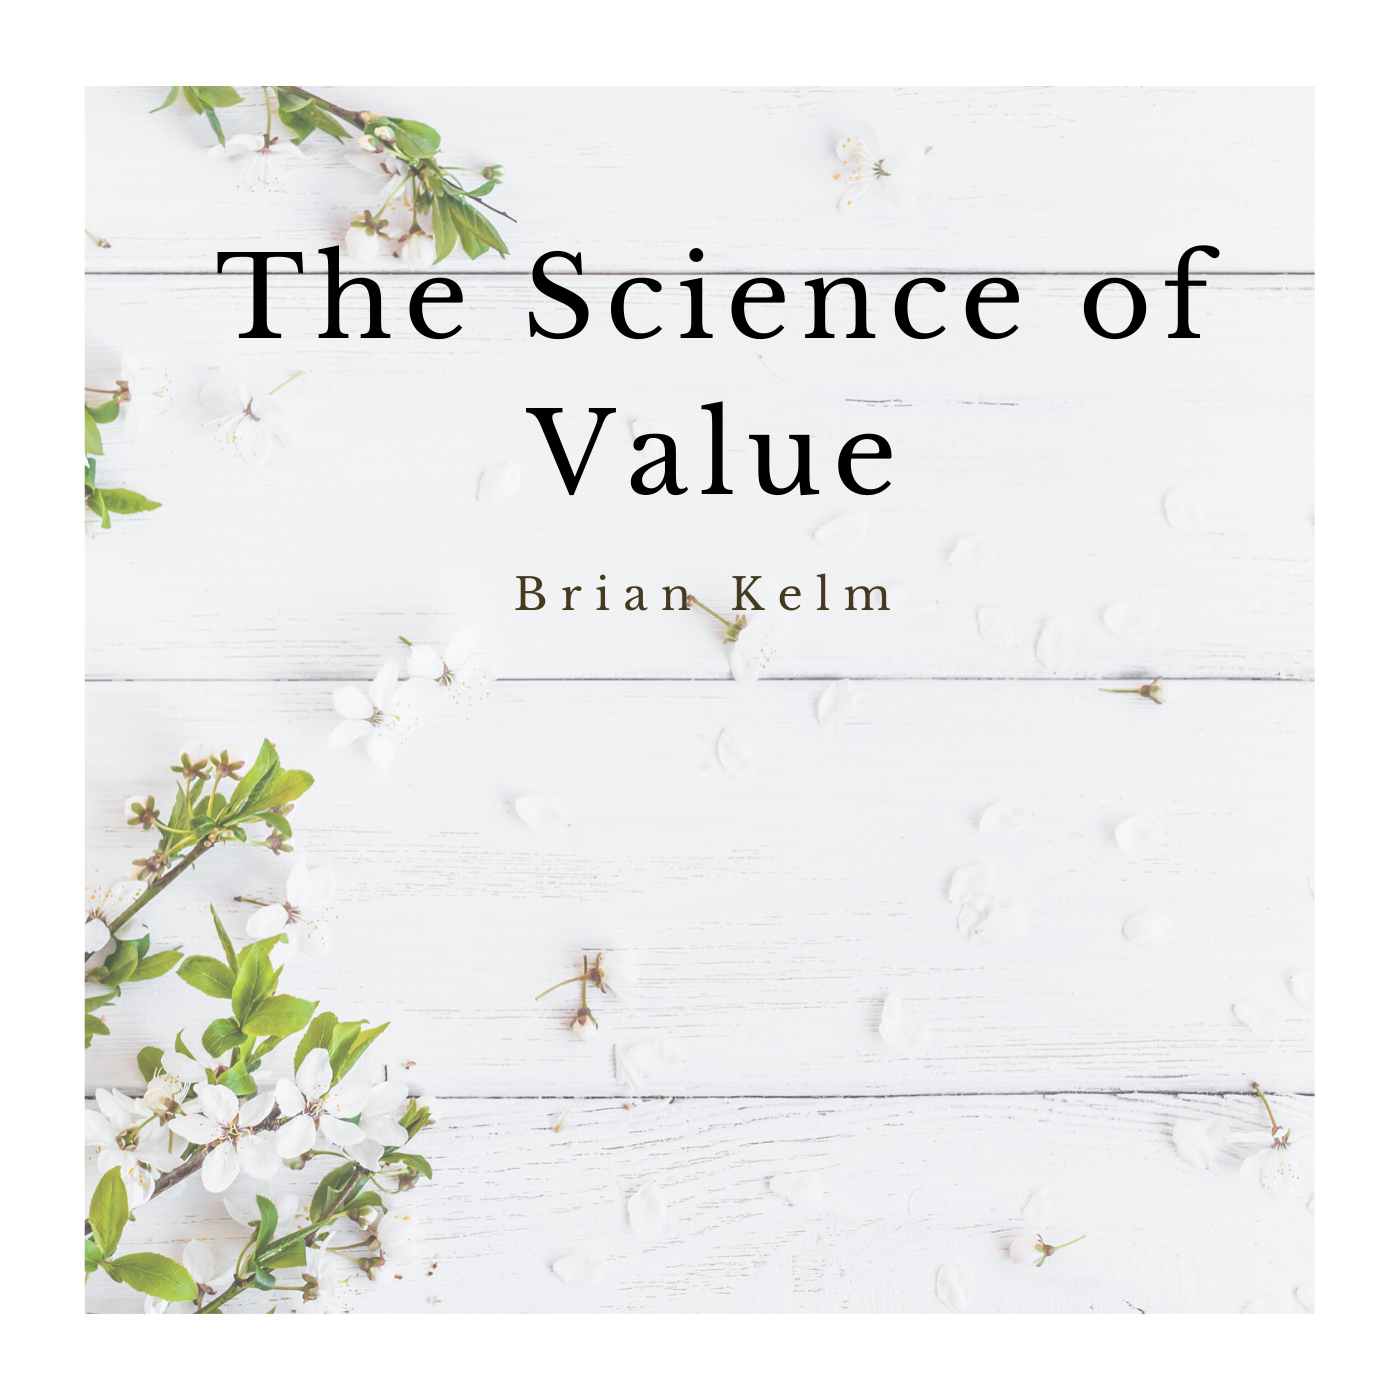 The Science of Value by Brian Kelm